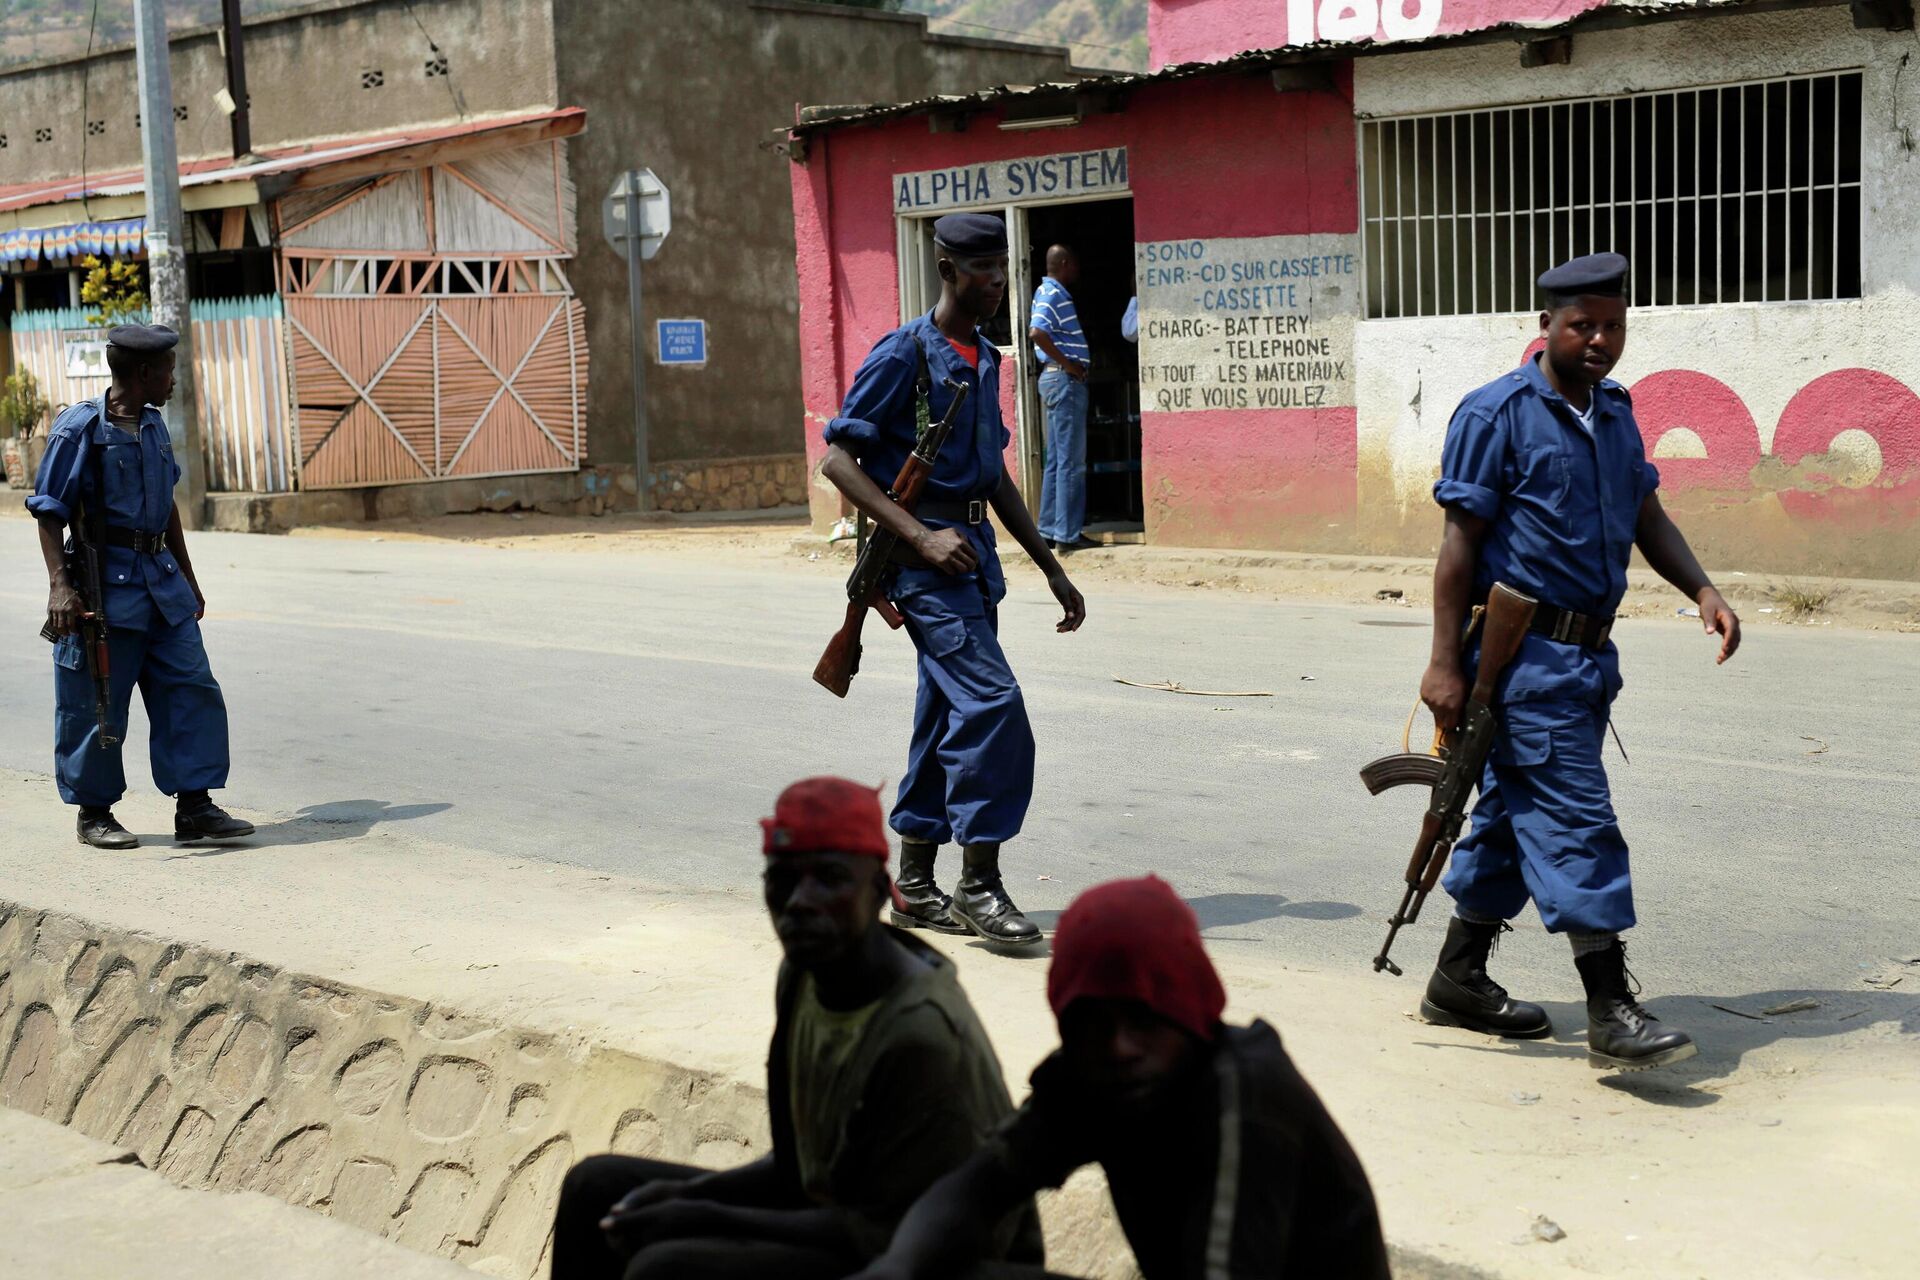 FILE - Policemen patrol the Musaga district of Bujumbura, Burundi on July 20, 2015. Opposition leaders and human rights groups warned in Dec. 2021 that Burundi's government has shown little if any improvement under Ndayishimiye, who took office after the death of President Pierre Nkurunziza in 2020 with talk of reforms after years of deadly political crackdowns. (AP Photo/Jerome Delay, File) - Sputnik International, 1920, 08.09.2022